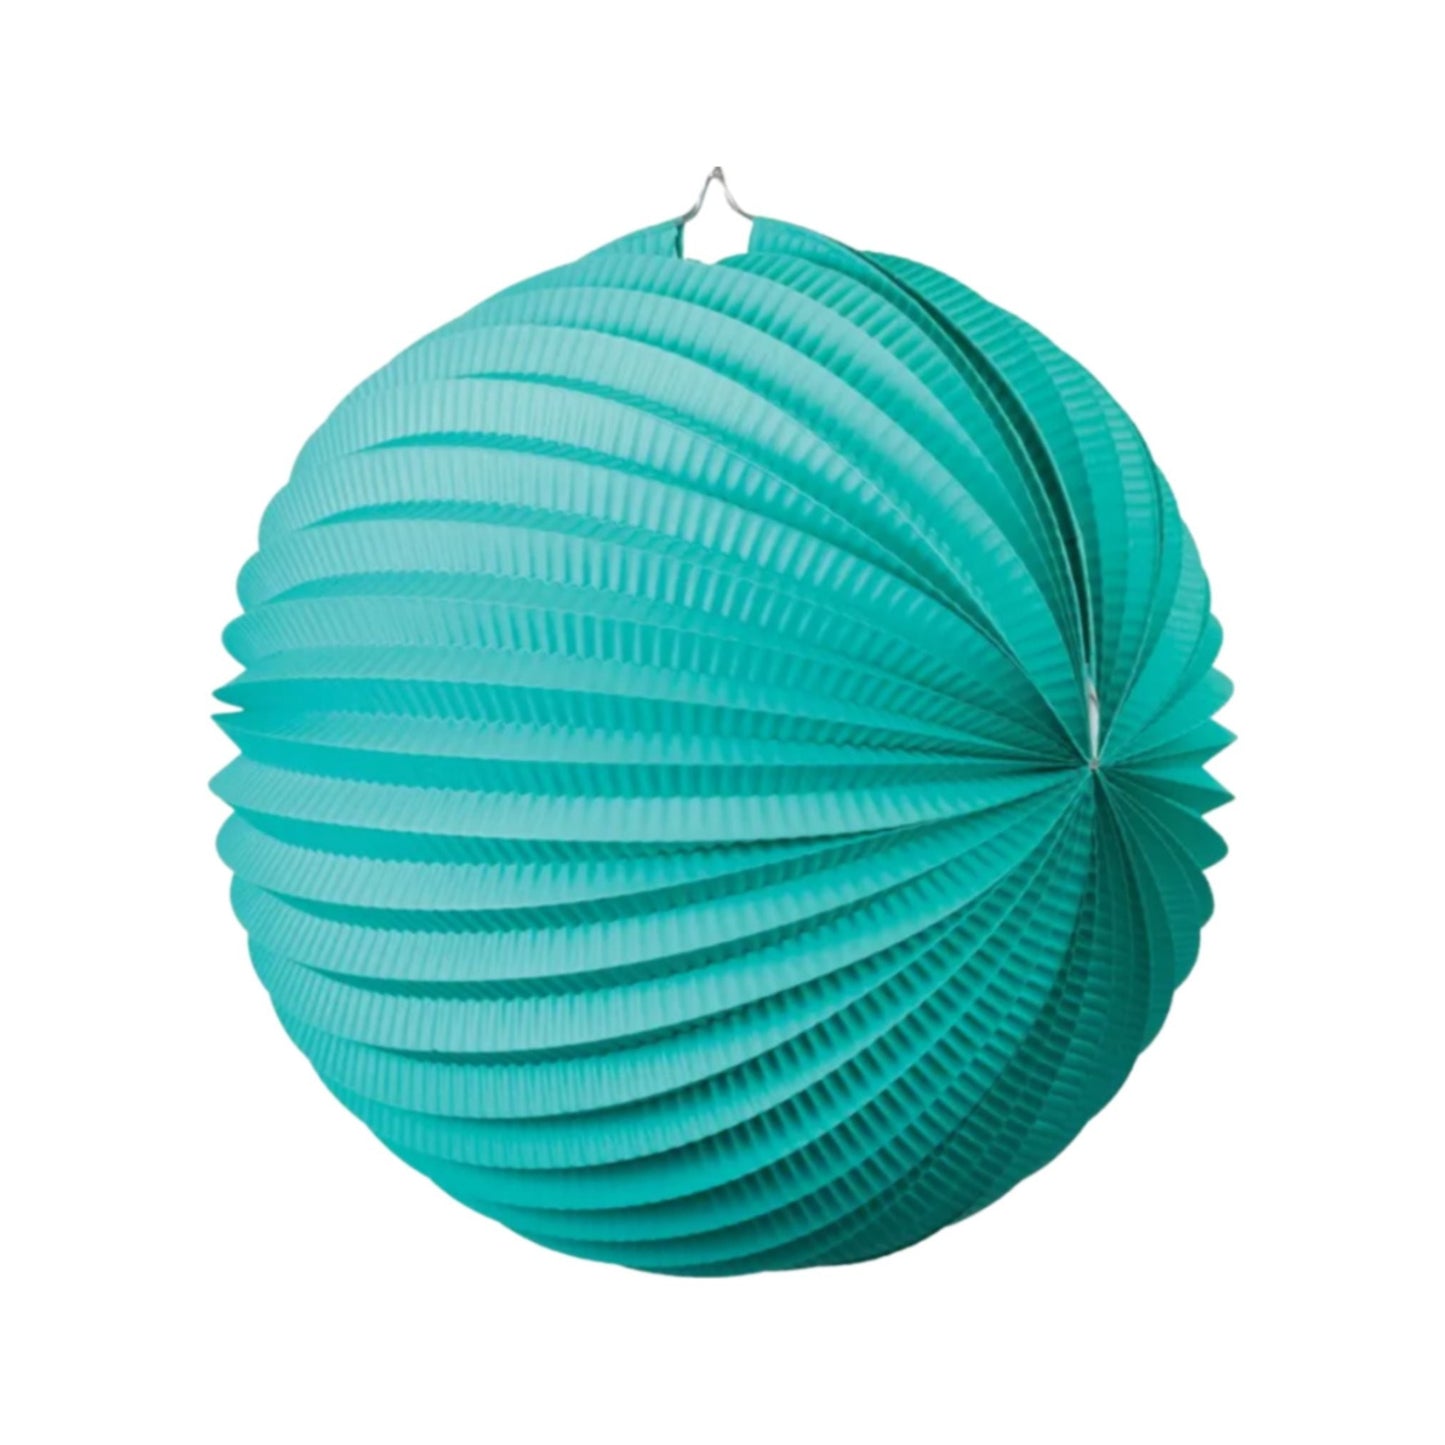 Accordion style paper lantern in turquoise. 25cm